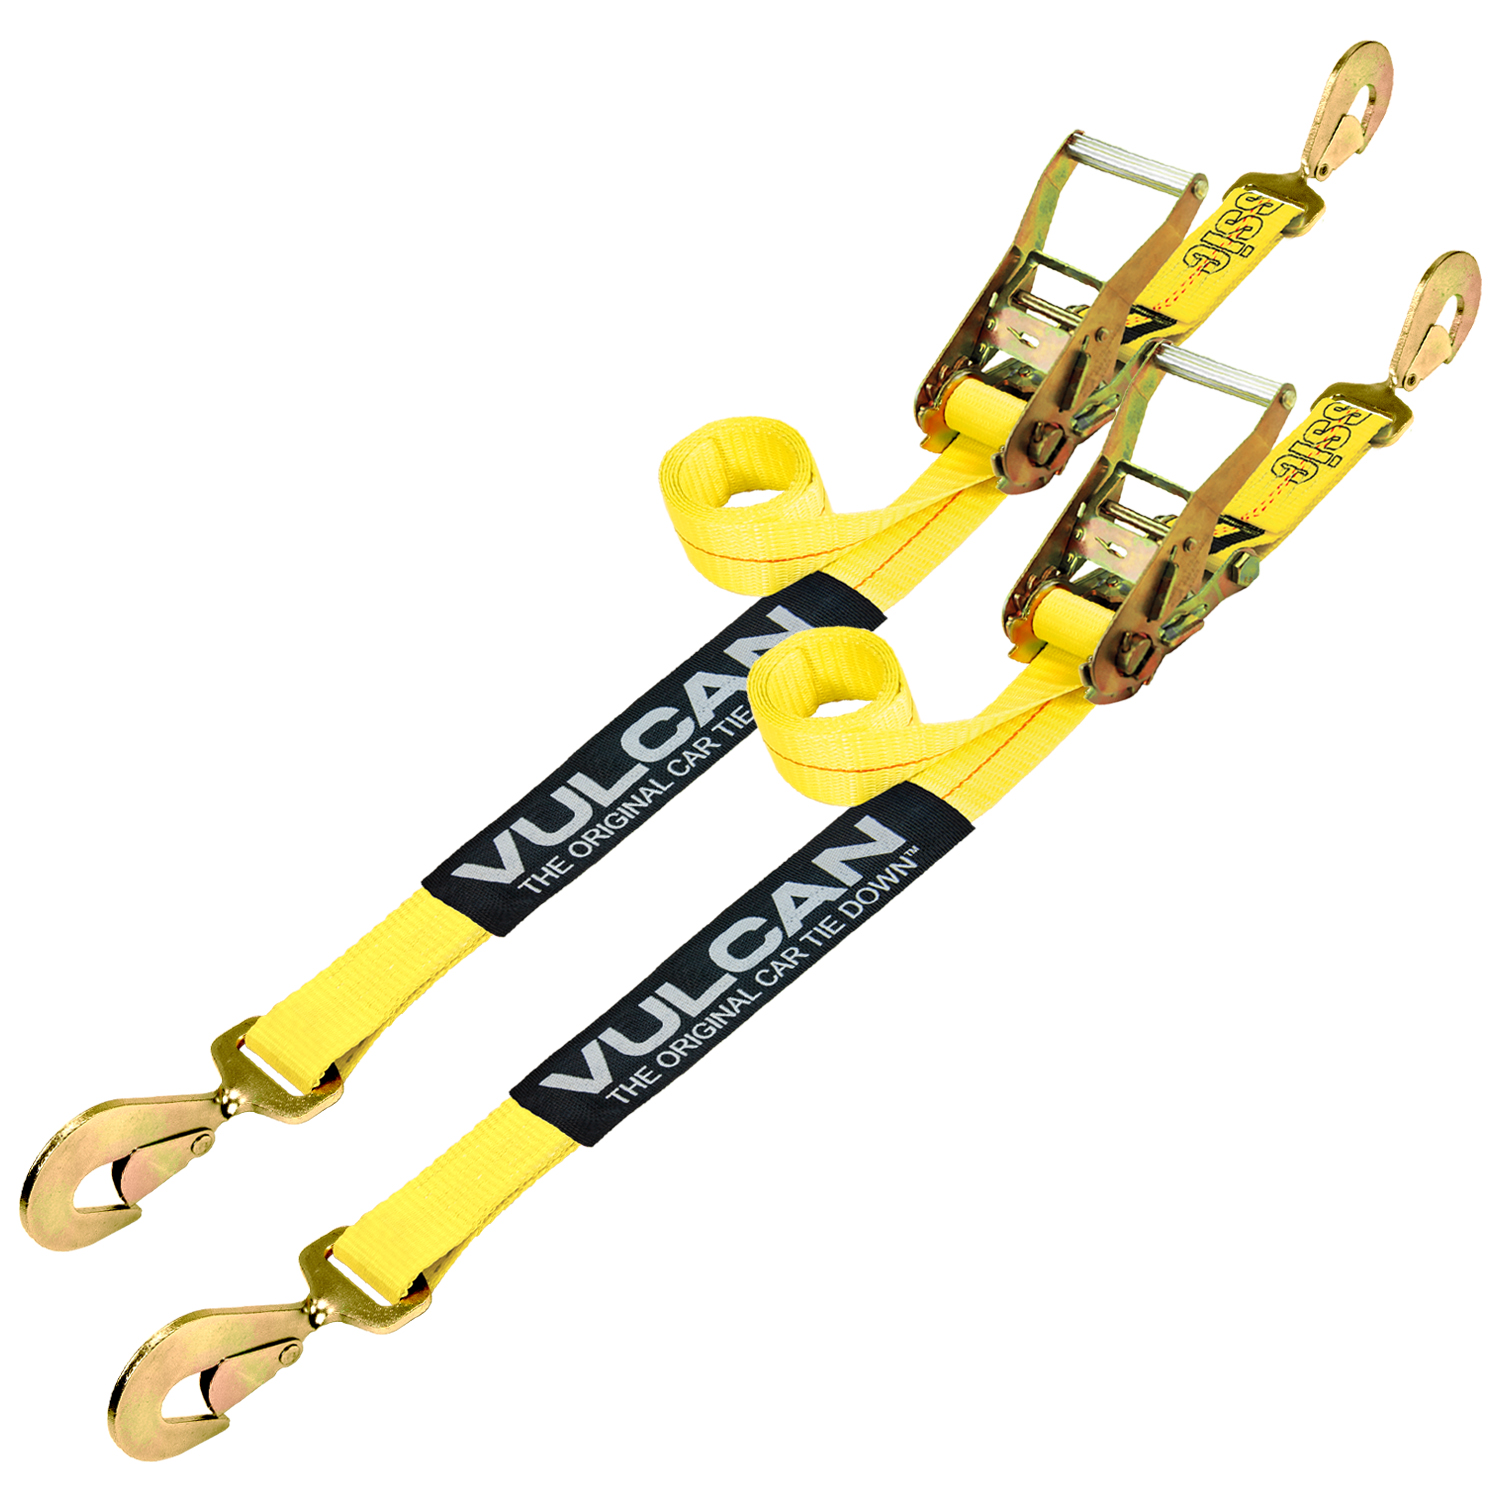 Vulcan Car Tie Down with Chain Tail Ratchet - Snap Hook - 96 inch - ProSeries - 3,300 Pound Safe Working Load